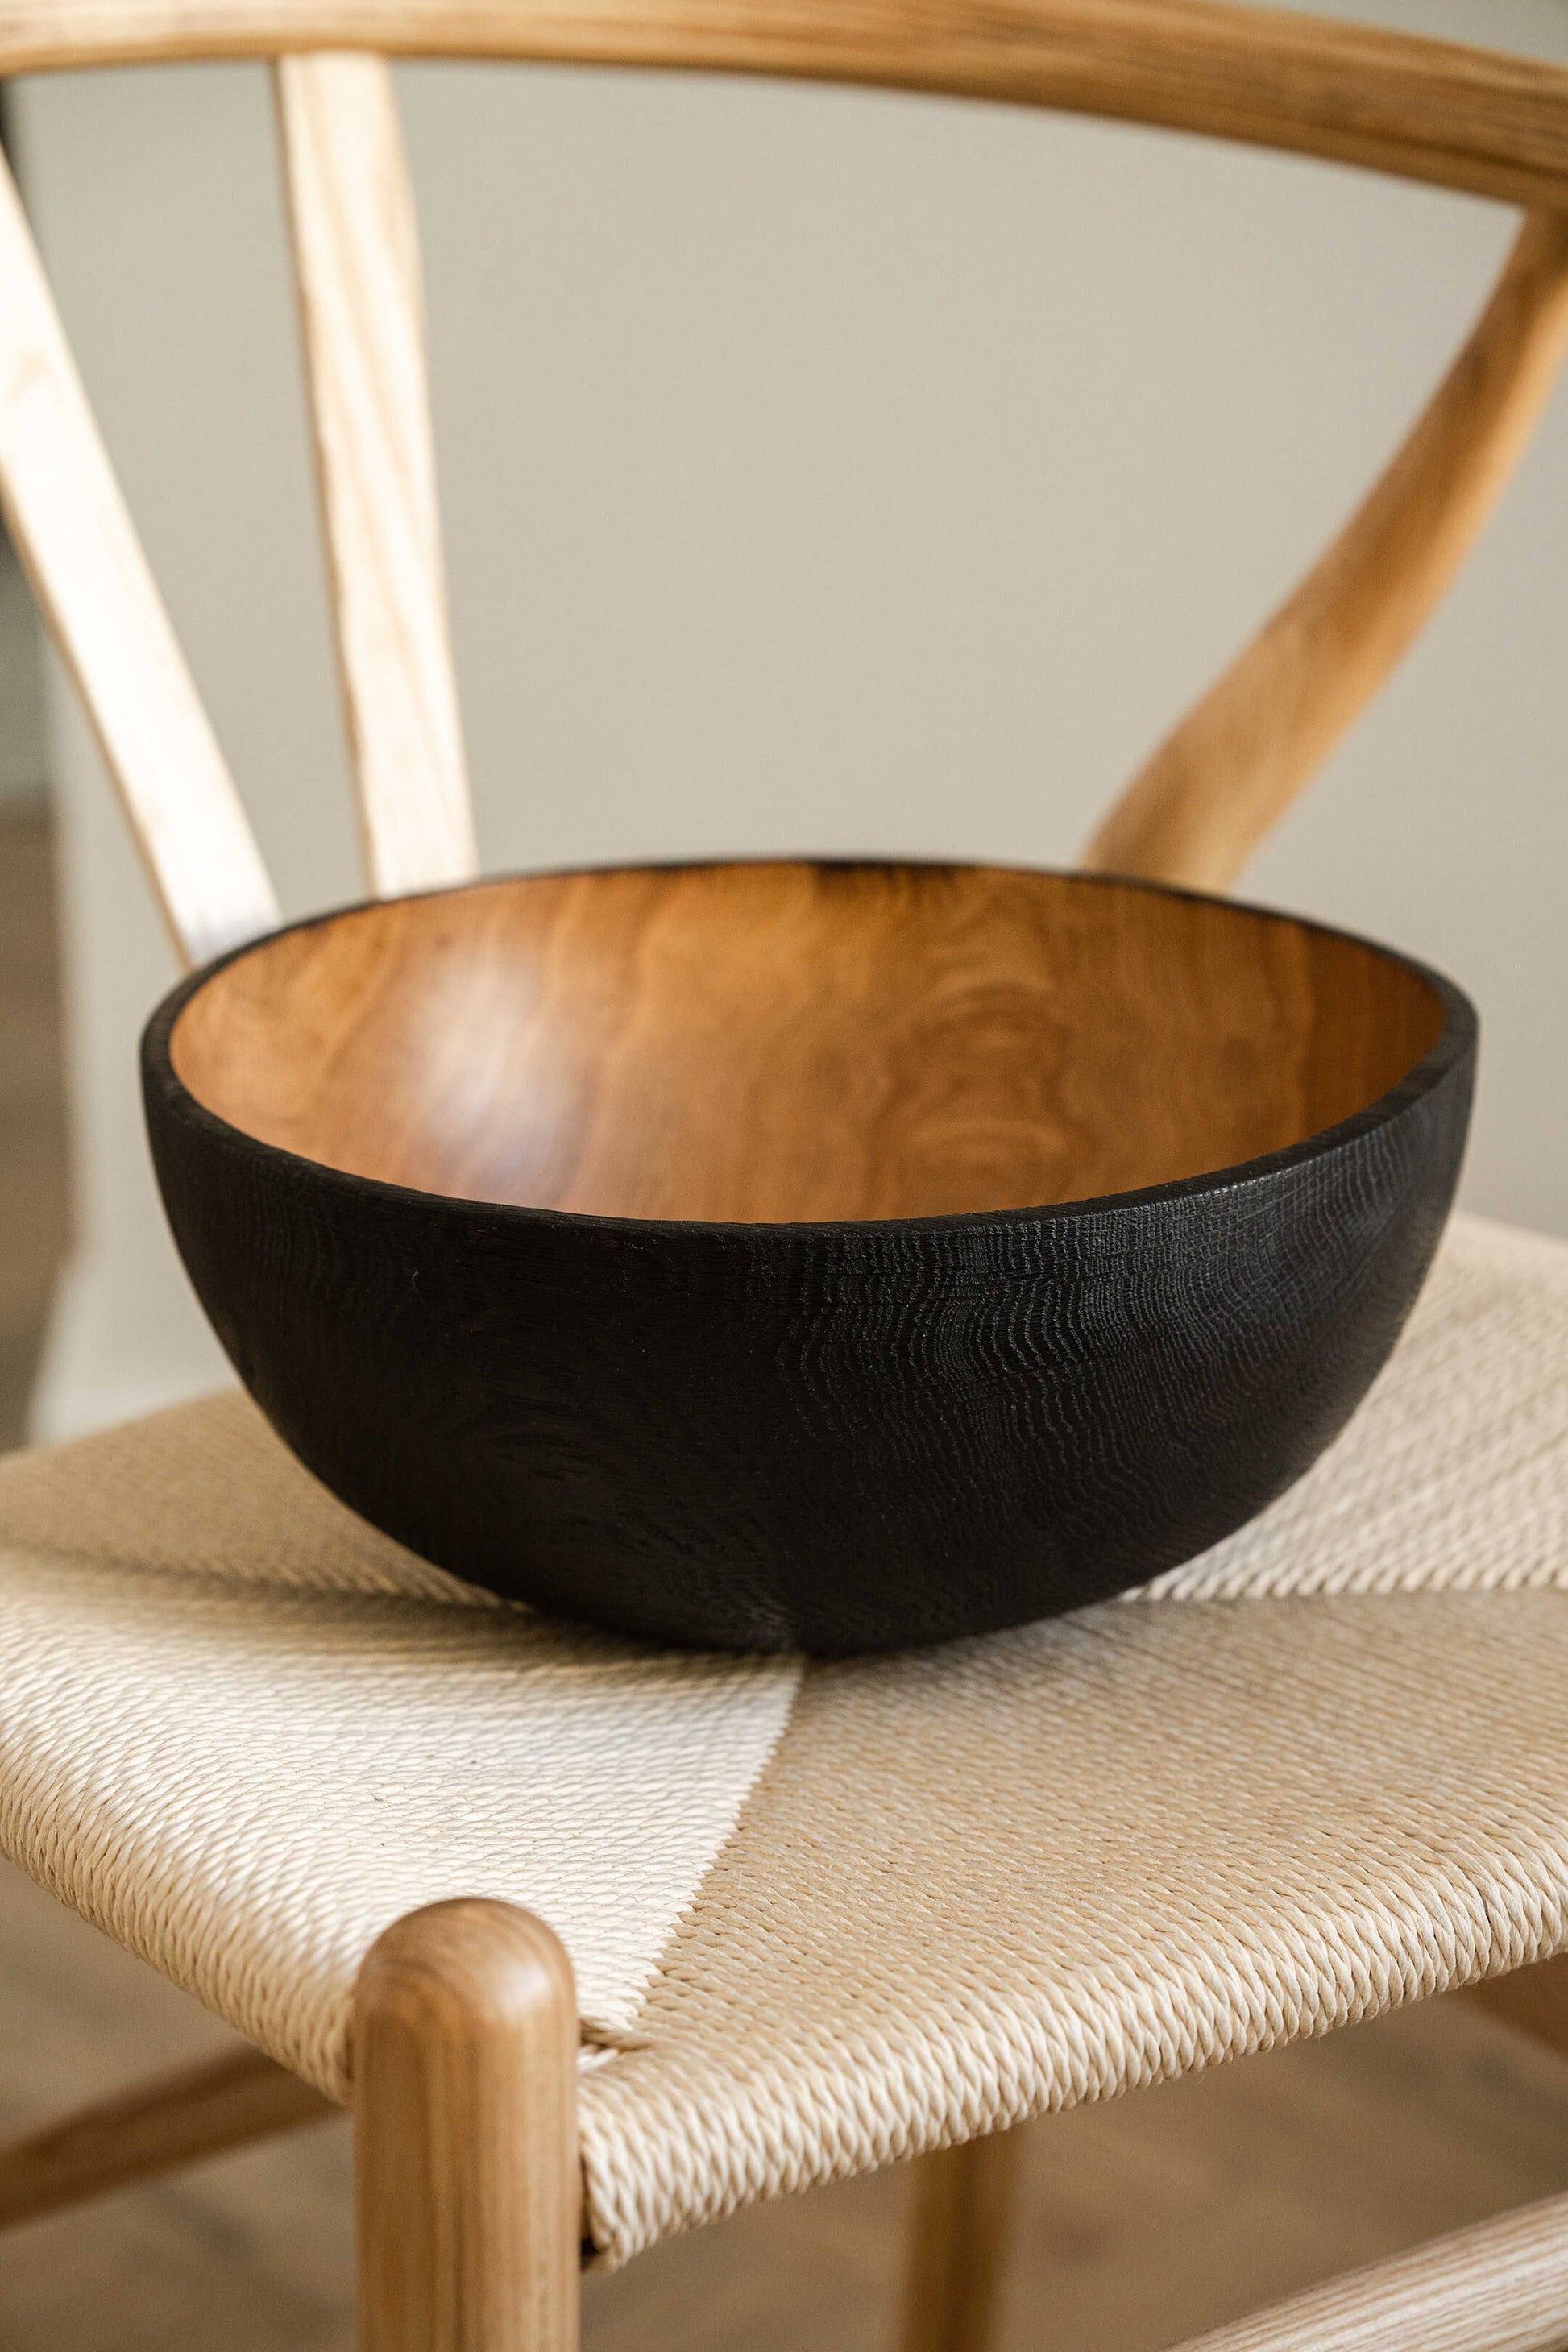 Ethical Trade Co Tabletop Hand-Carved Ukrainian Charred Wood Bowl